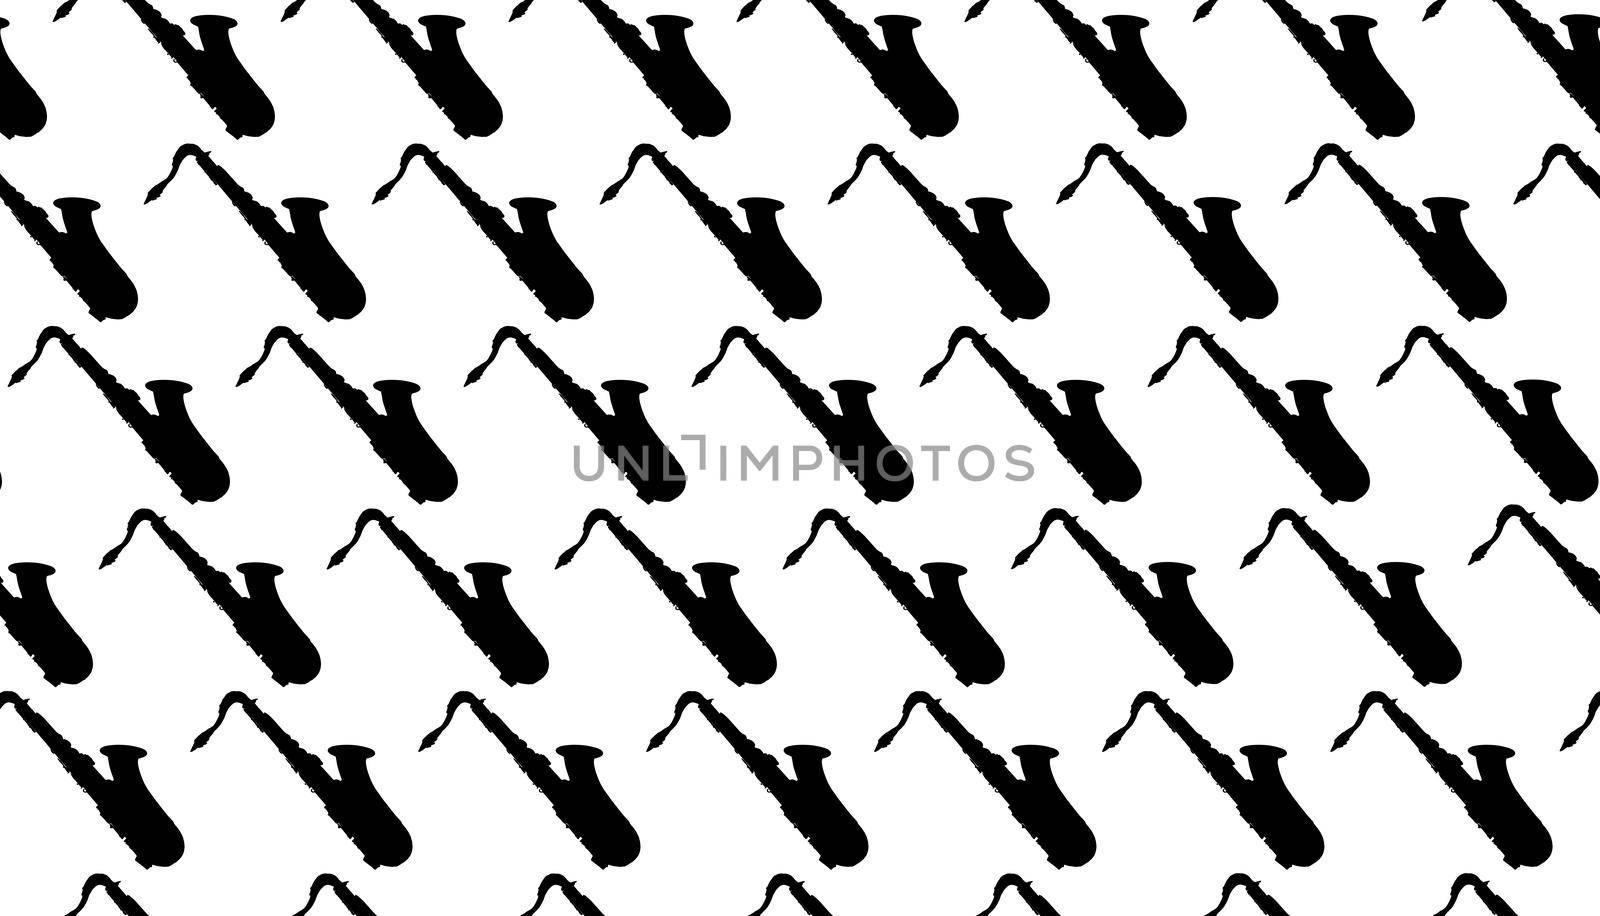 Silhouette of a group of typical saxophones over a white background as a seamless pattern